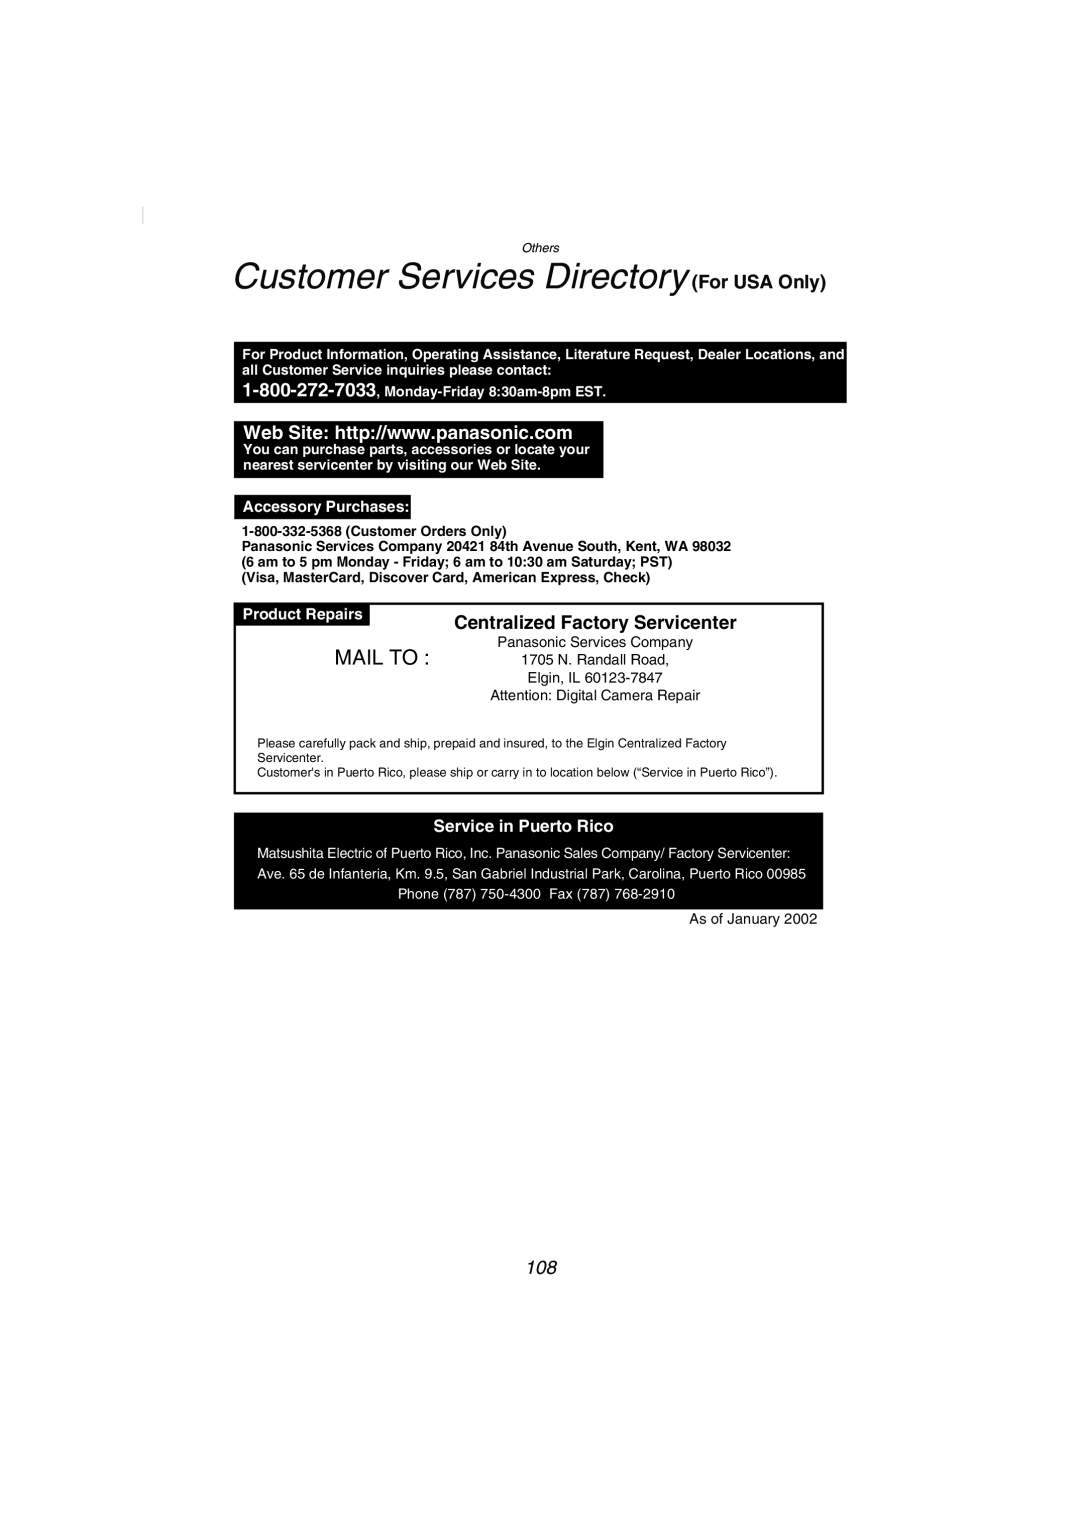 Panasonic DMC-FZ2PP Customer Services Directory For USA Only, Mail To, Centralized Factory Servicenter, Product Repairs 